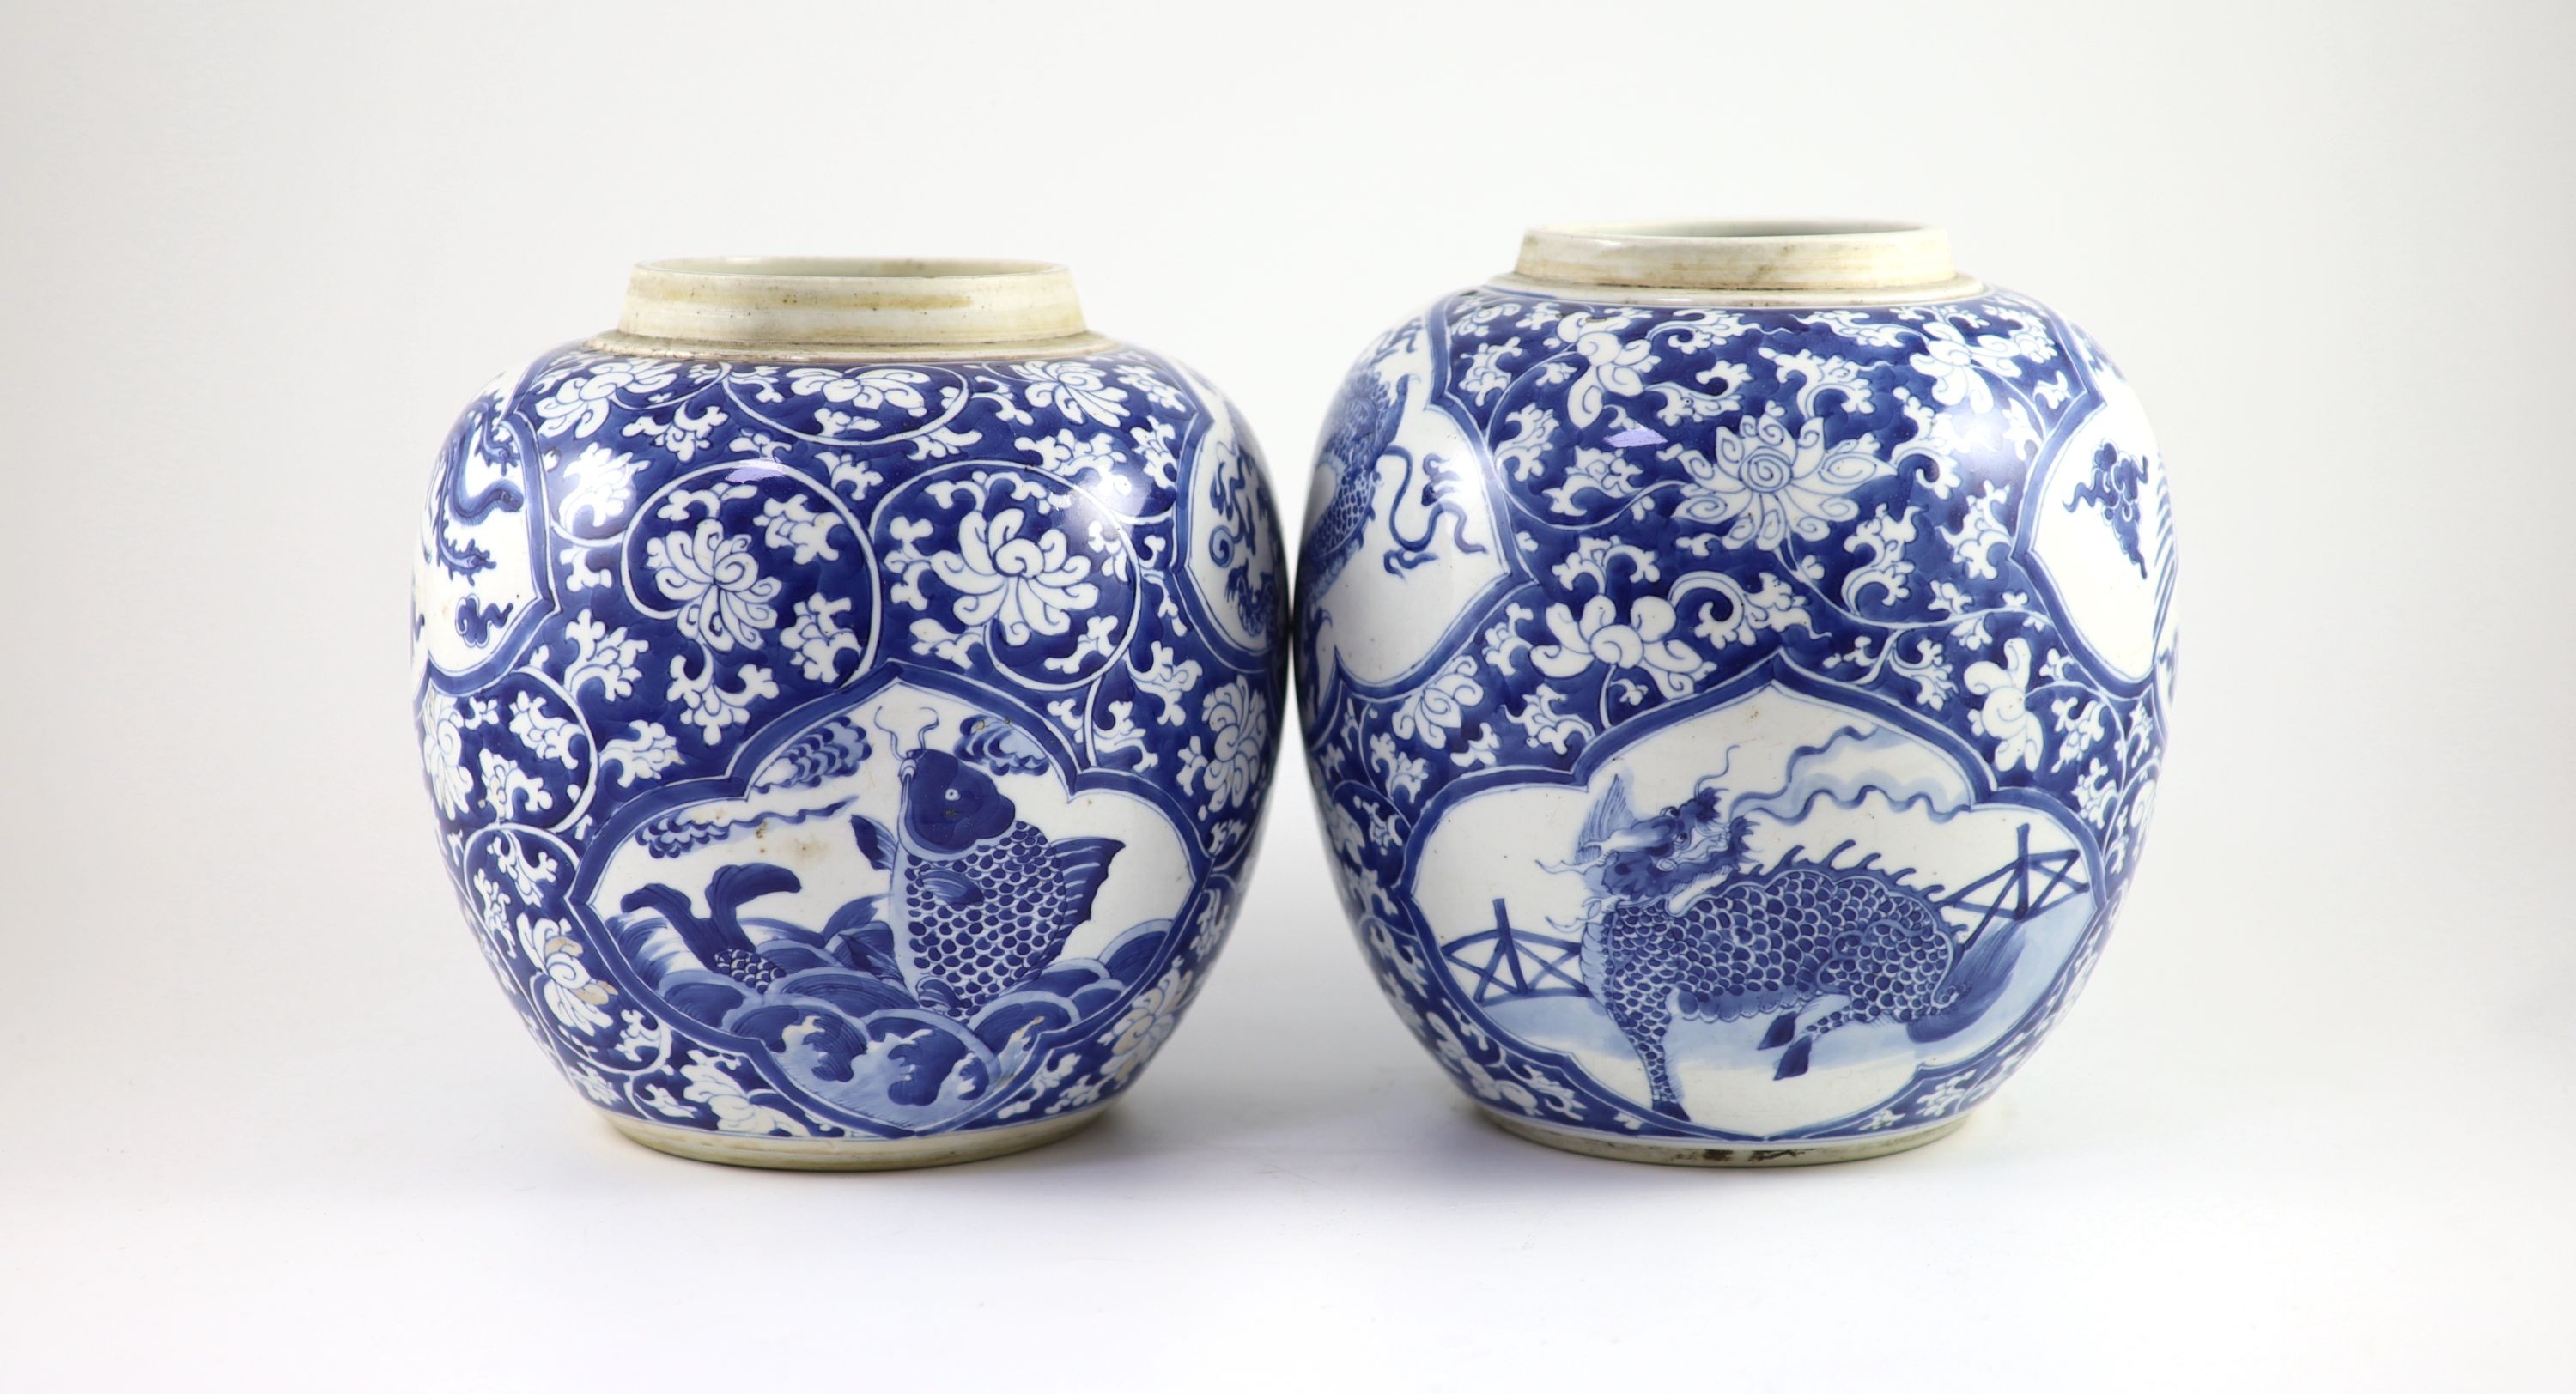 A good pair of Chinese blue and white ‘mythical beast’ jars, Kangxi period, Slight height difference 23 cm and 23.5 cm high